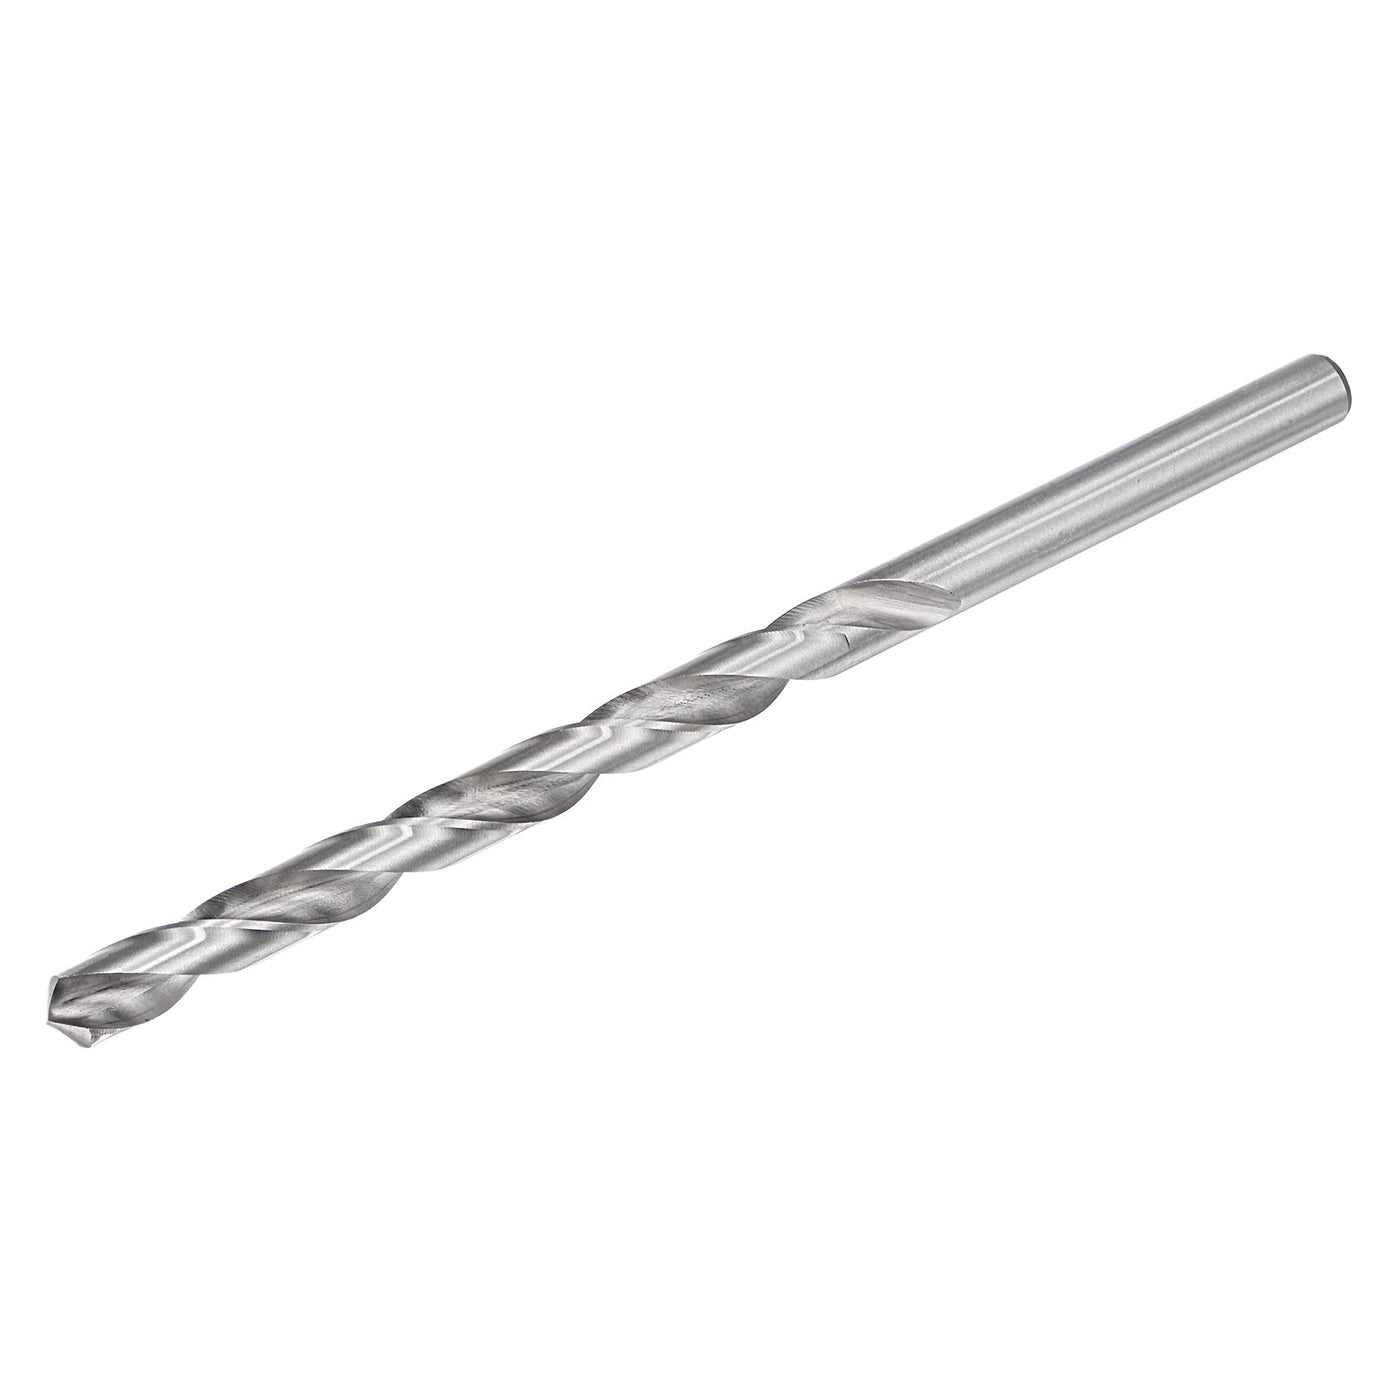 uxcell Uxcell 15.5mm Twist Drill Bits, High-Speed Steel Extra Long Drill Bit 300mm Length